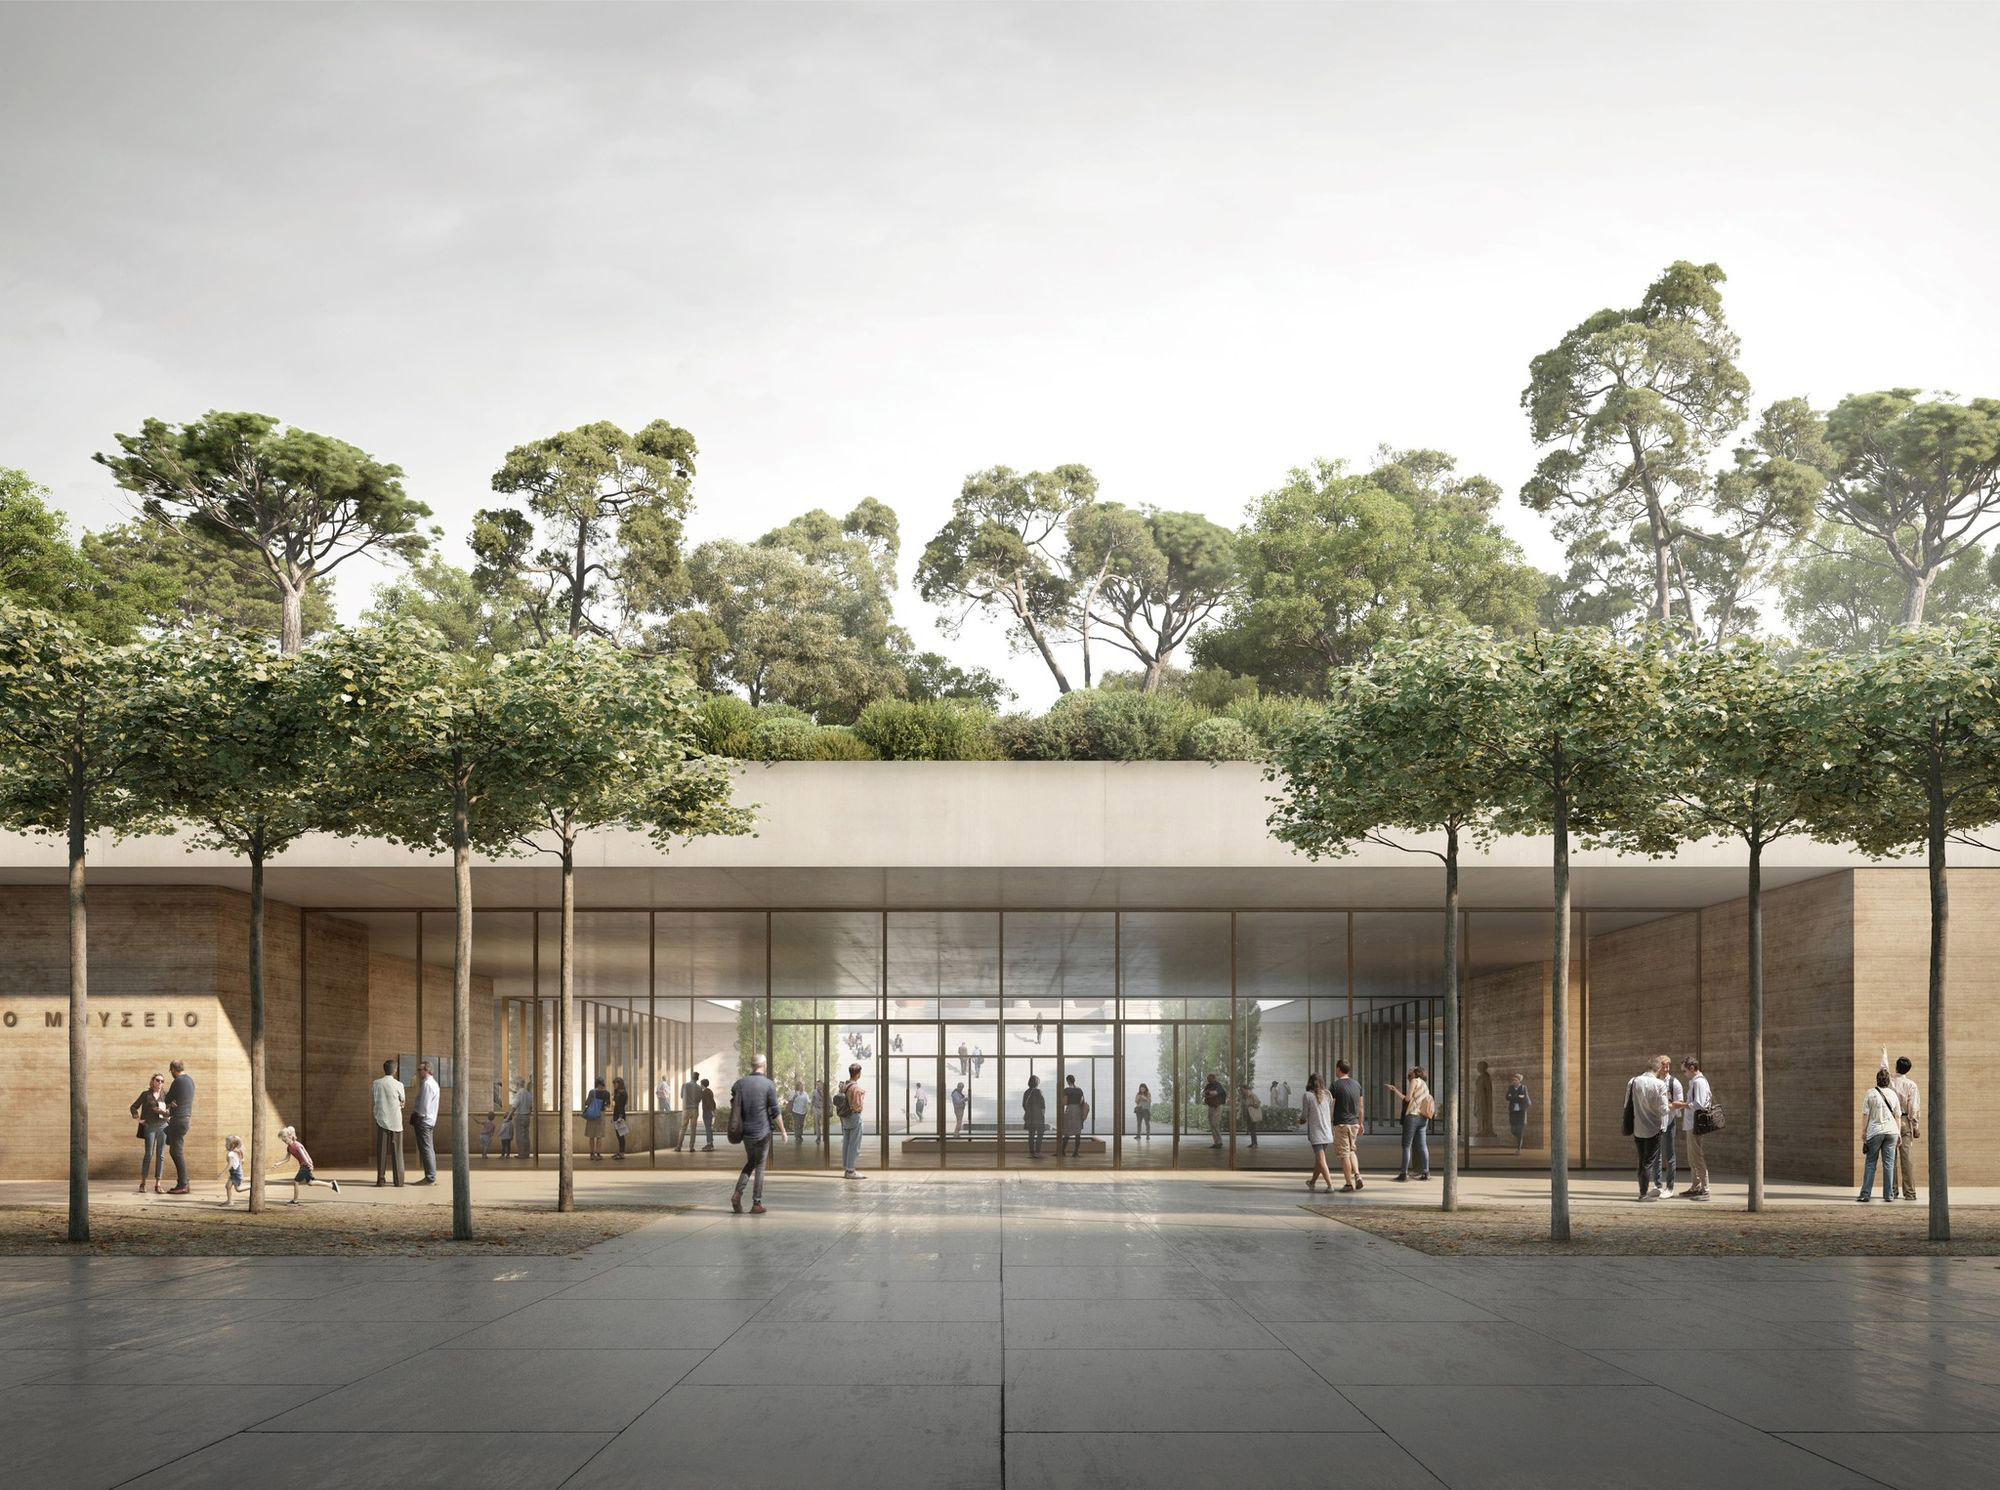 National Archaeological Museum design by David Chipperfield Architects